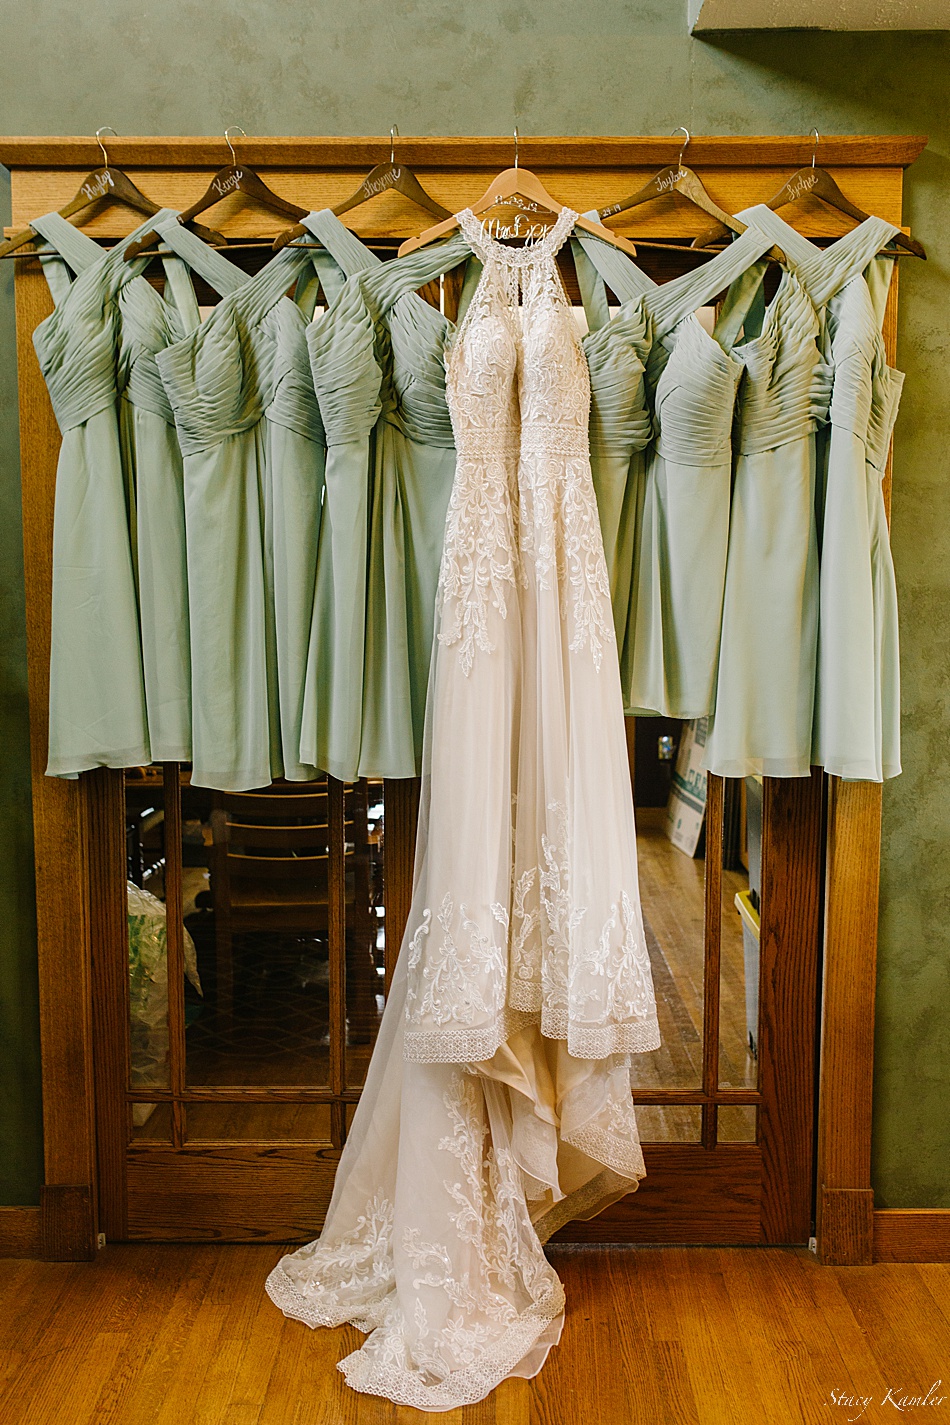 Bride and Bridesmaid Dresses hanging up